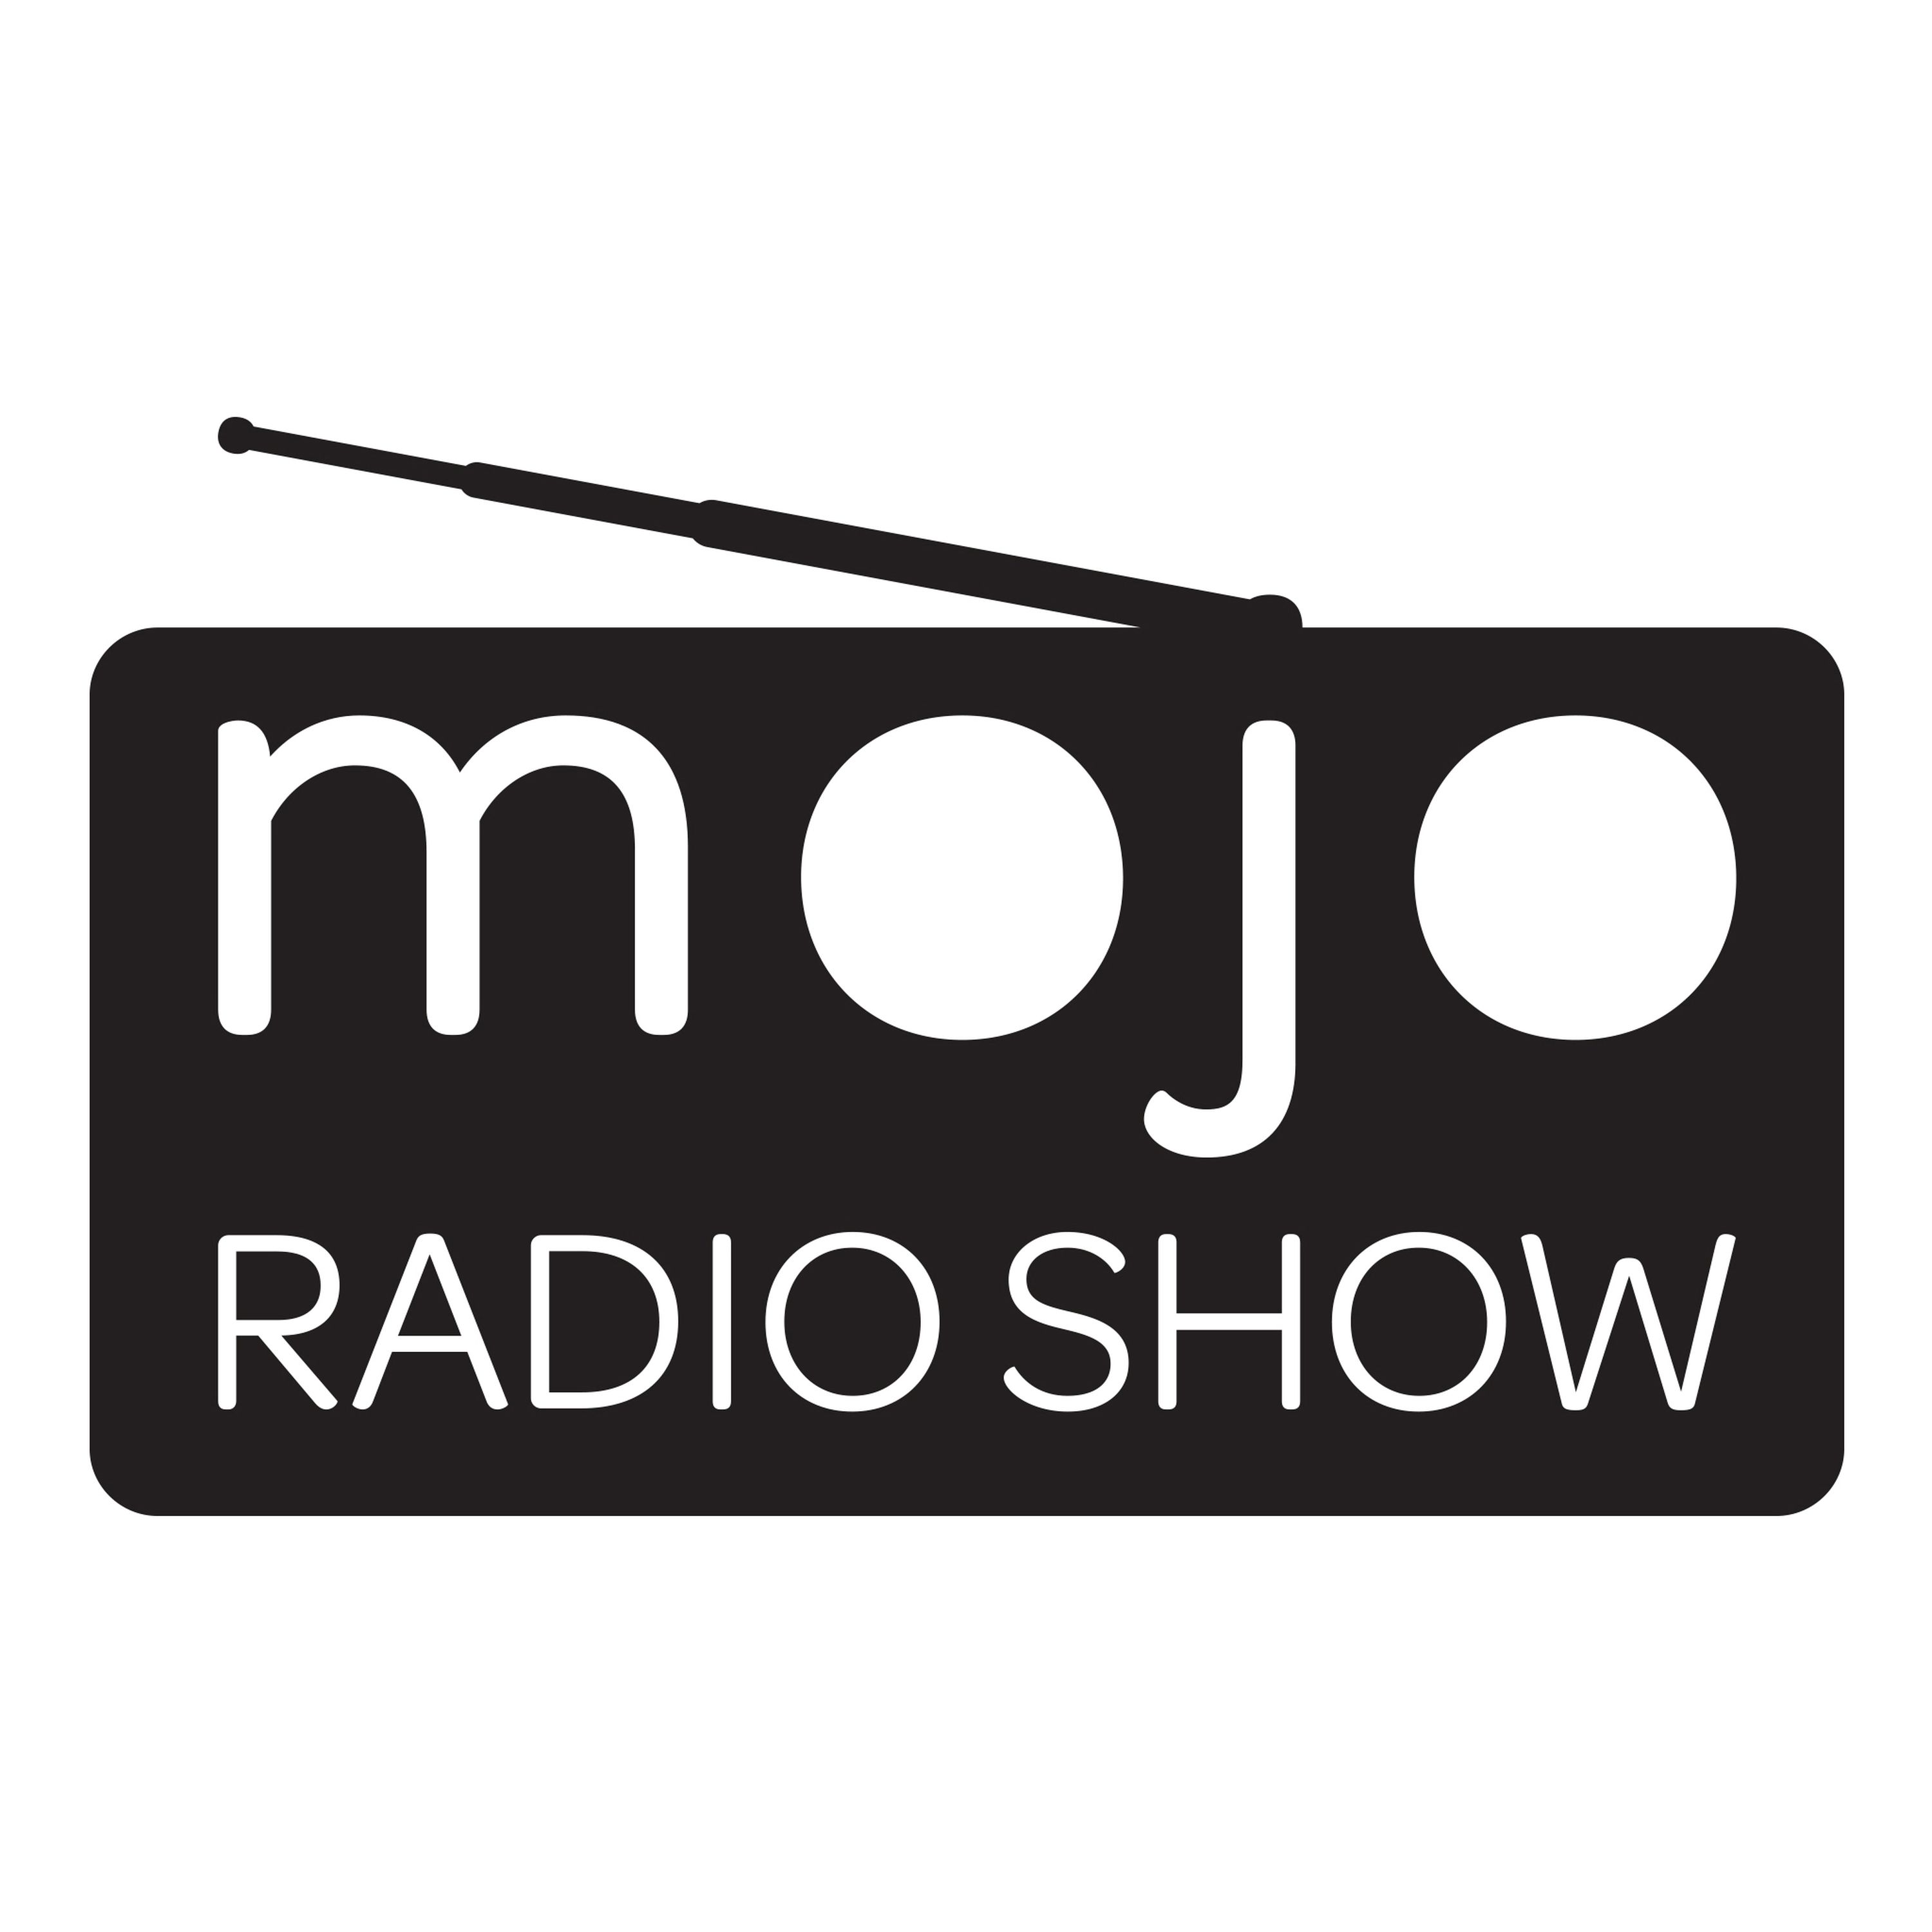 The Mojo Radio Show EP 137: Kick the Butt of Fear - Cut The Crap - Face Your Fears - Love Your Life - Lauren Handel Zander